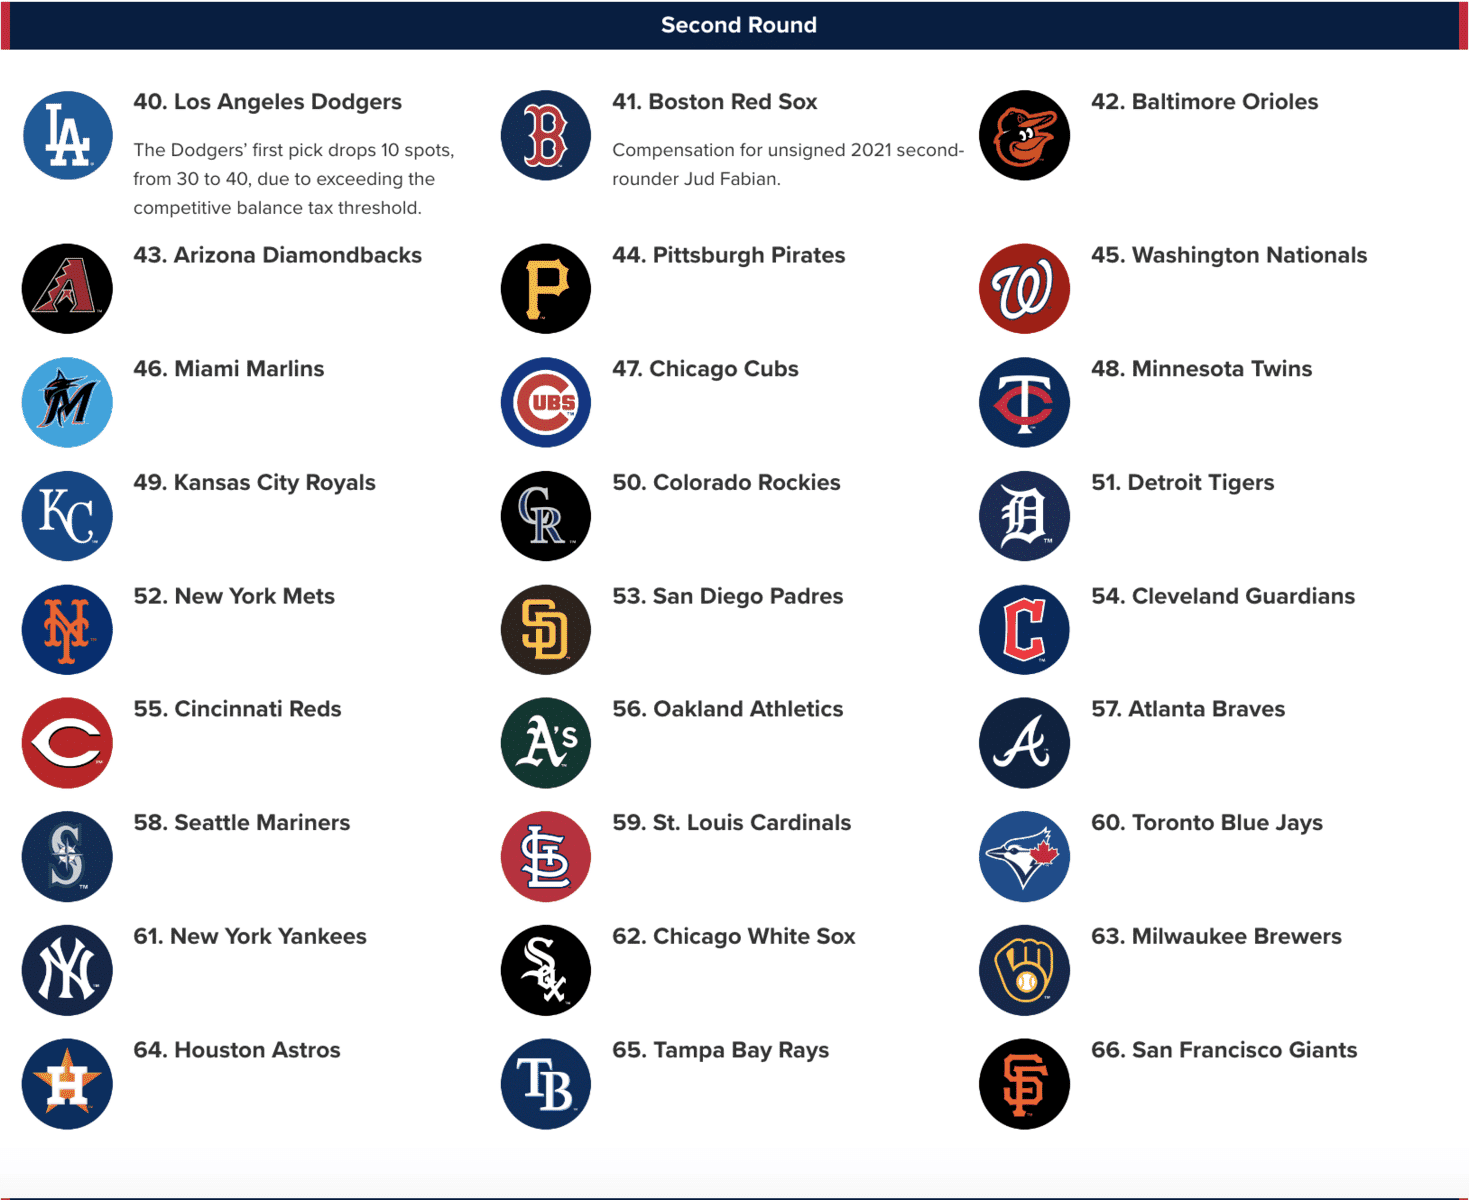 How to watch, listen to, and stream the 2022 MLB Draft